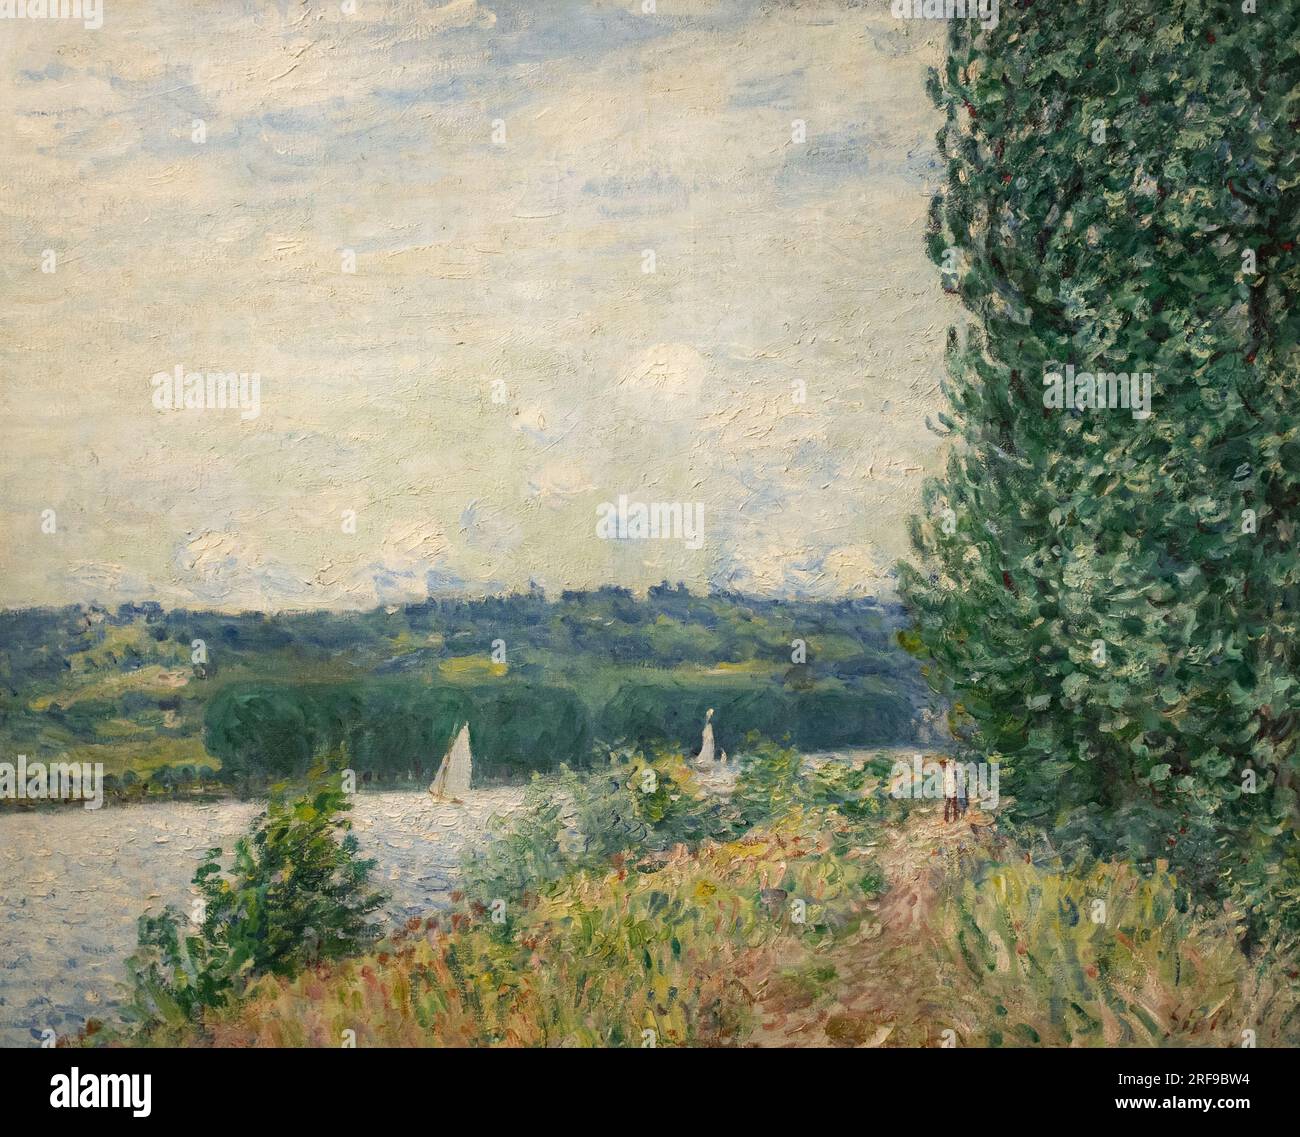 Alfred Sisley painting, La seine a sahurs, coup de vent (The Seine in a gale); 1894. 19th century British impressionist landscape painter and artist. Stock Photo